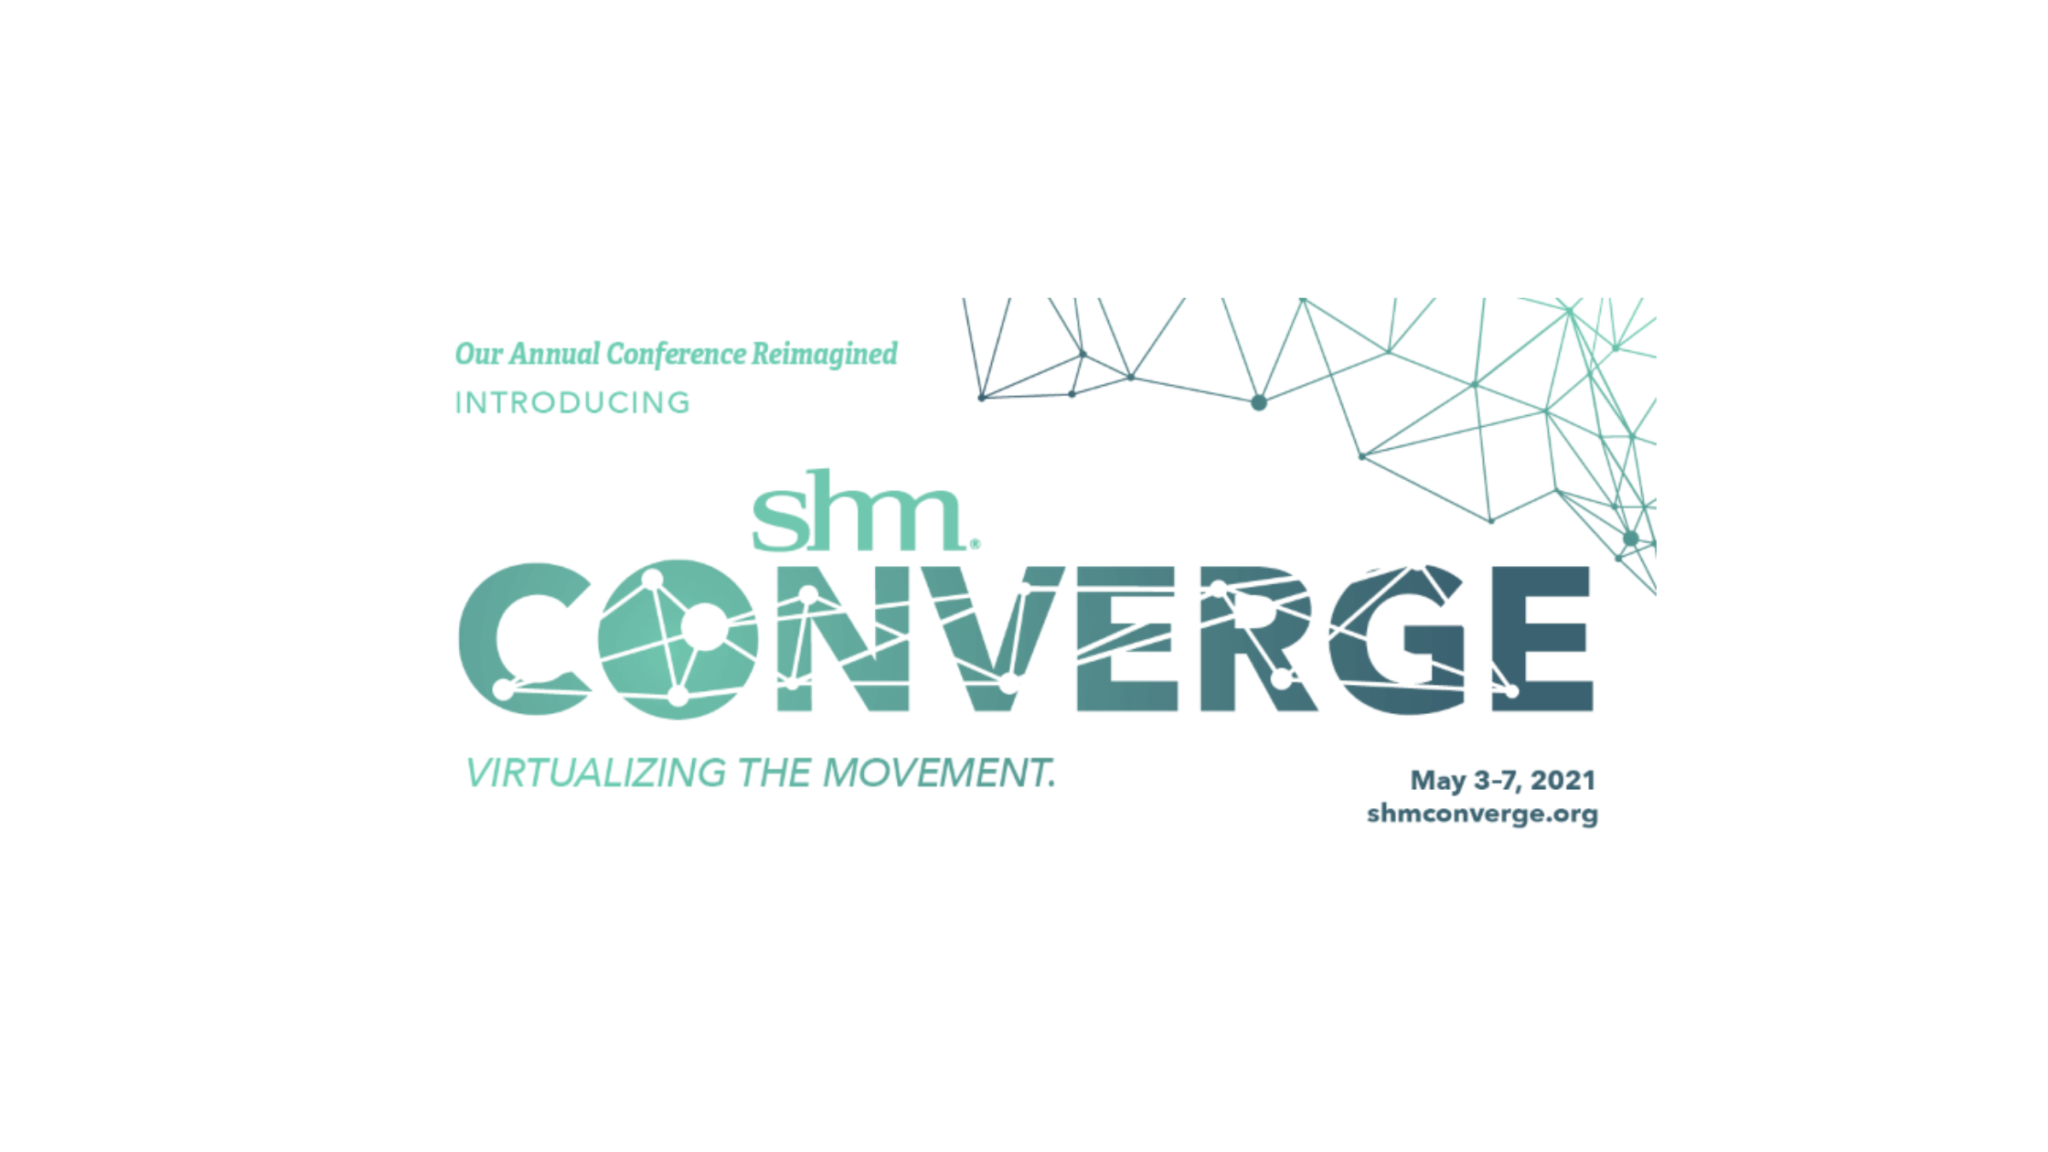 medaptus Attending SHM Converge Virtual Conference on May 3-7, 2021